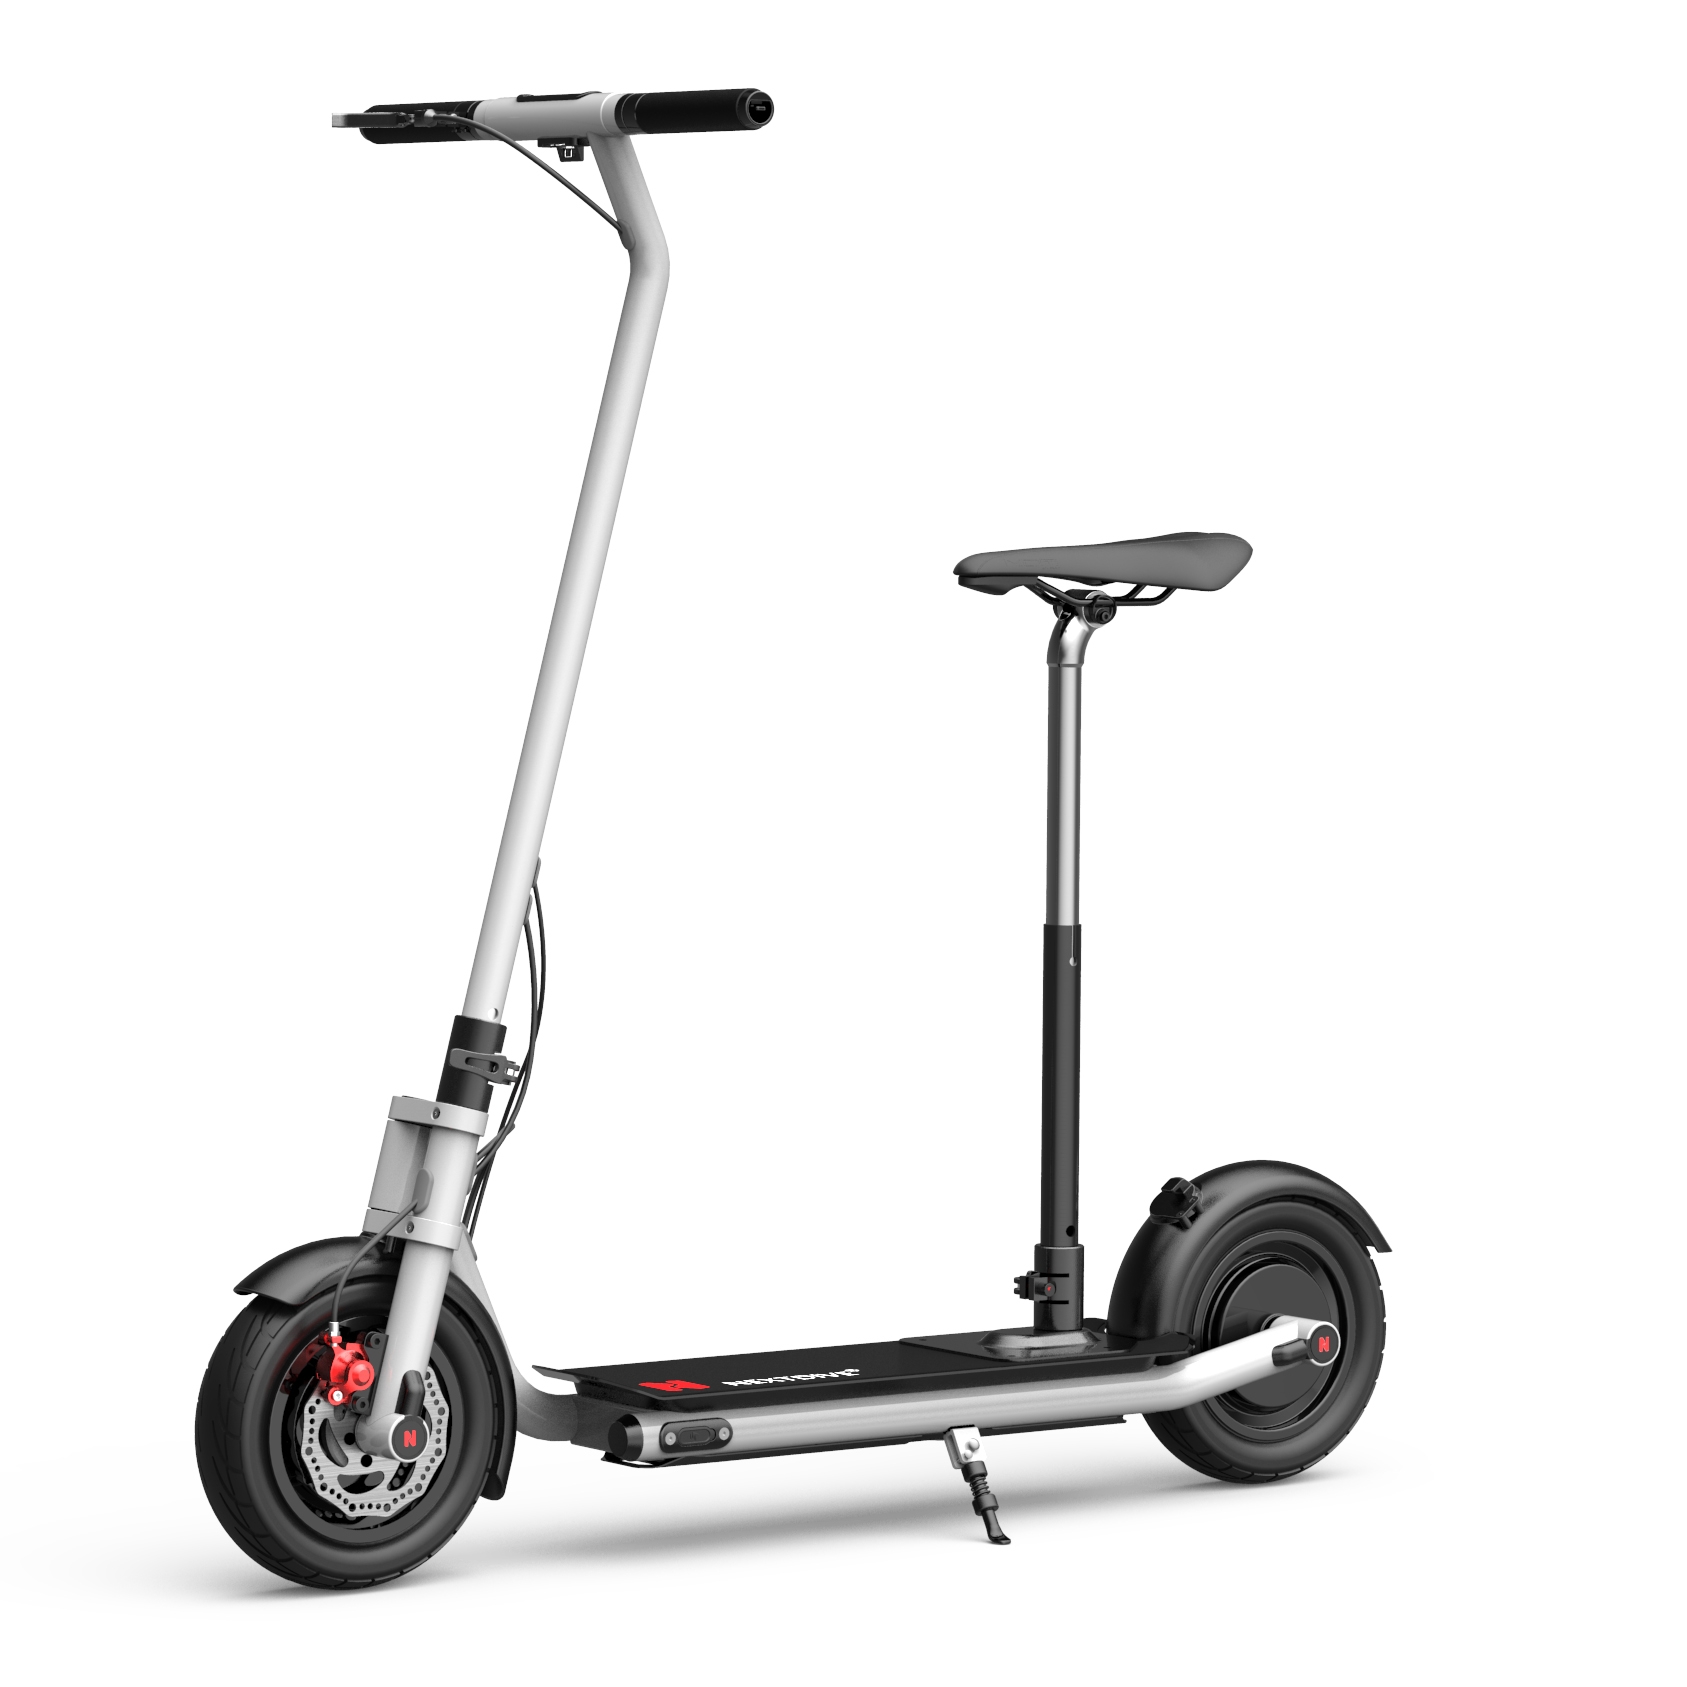 NEXTDRIVE N-7 300W 36V 10.4Ah Foldable Electric Scooter With Saddle For Adults/Kids 32 Km/h Max Speed 18-36 Km Mileage